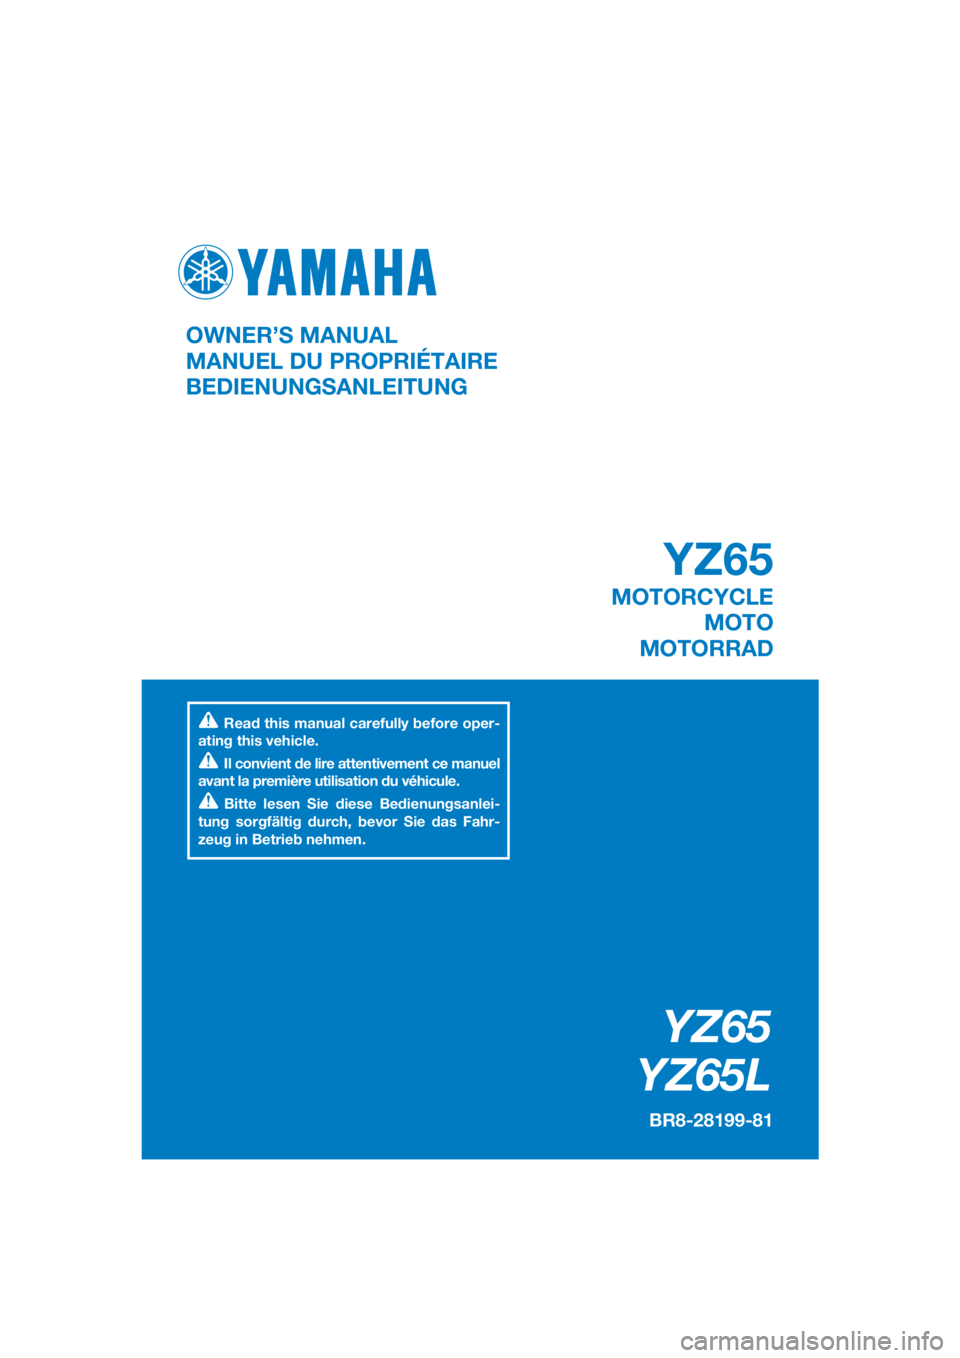 YAMAHA YZ65 2020  Owners Manual DIC183
YZ65
YZ65L
BR8-28199-81
OWNER’S MANUAL
MANUEL DU PROPRIÉTAIRE
BEDIENUNGSANLEITUNG
Read this manual carefully before oper-
ating this vehicle.
Il convient de lire attentivement ce manuel 
ava